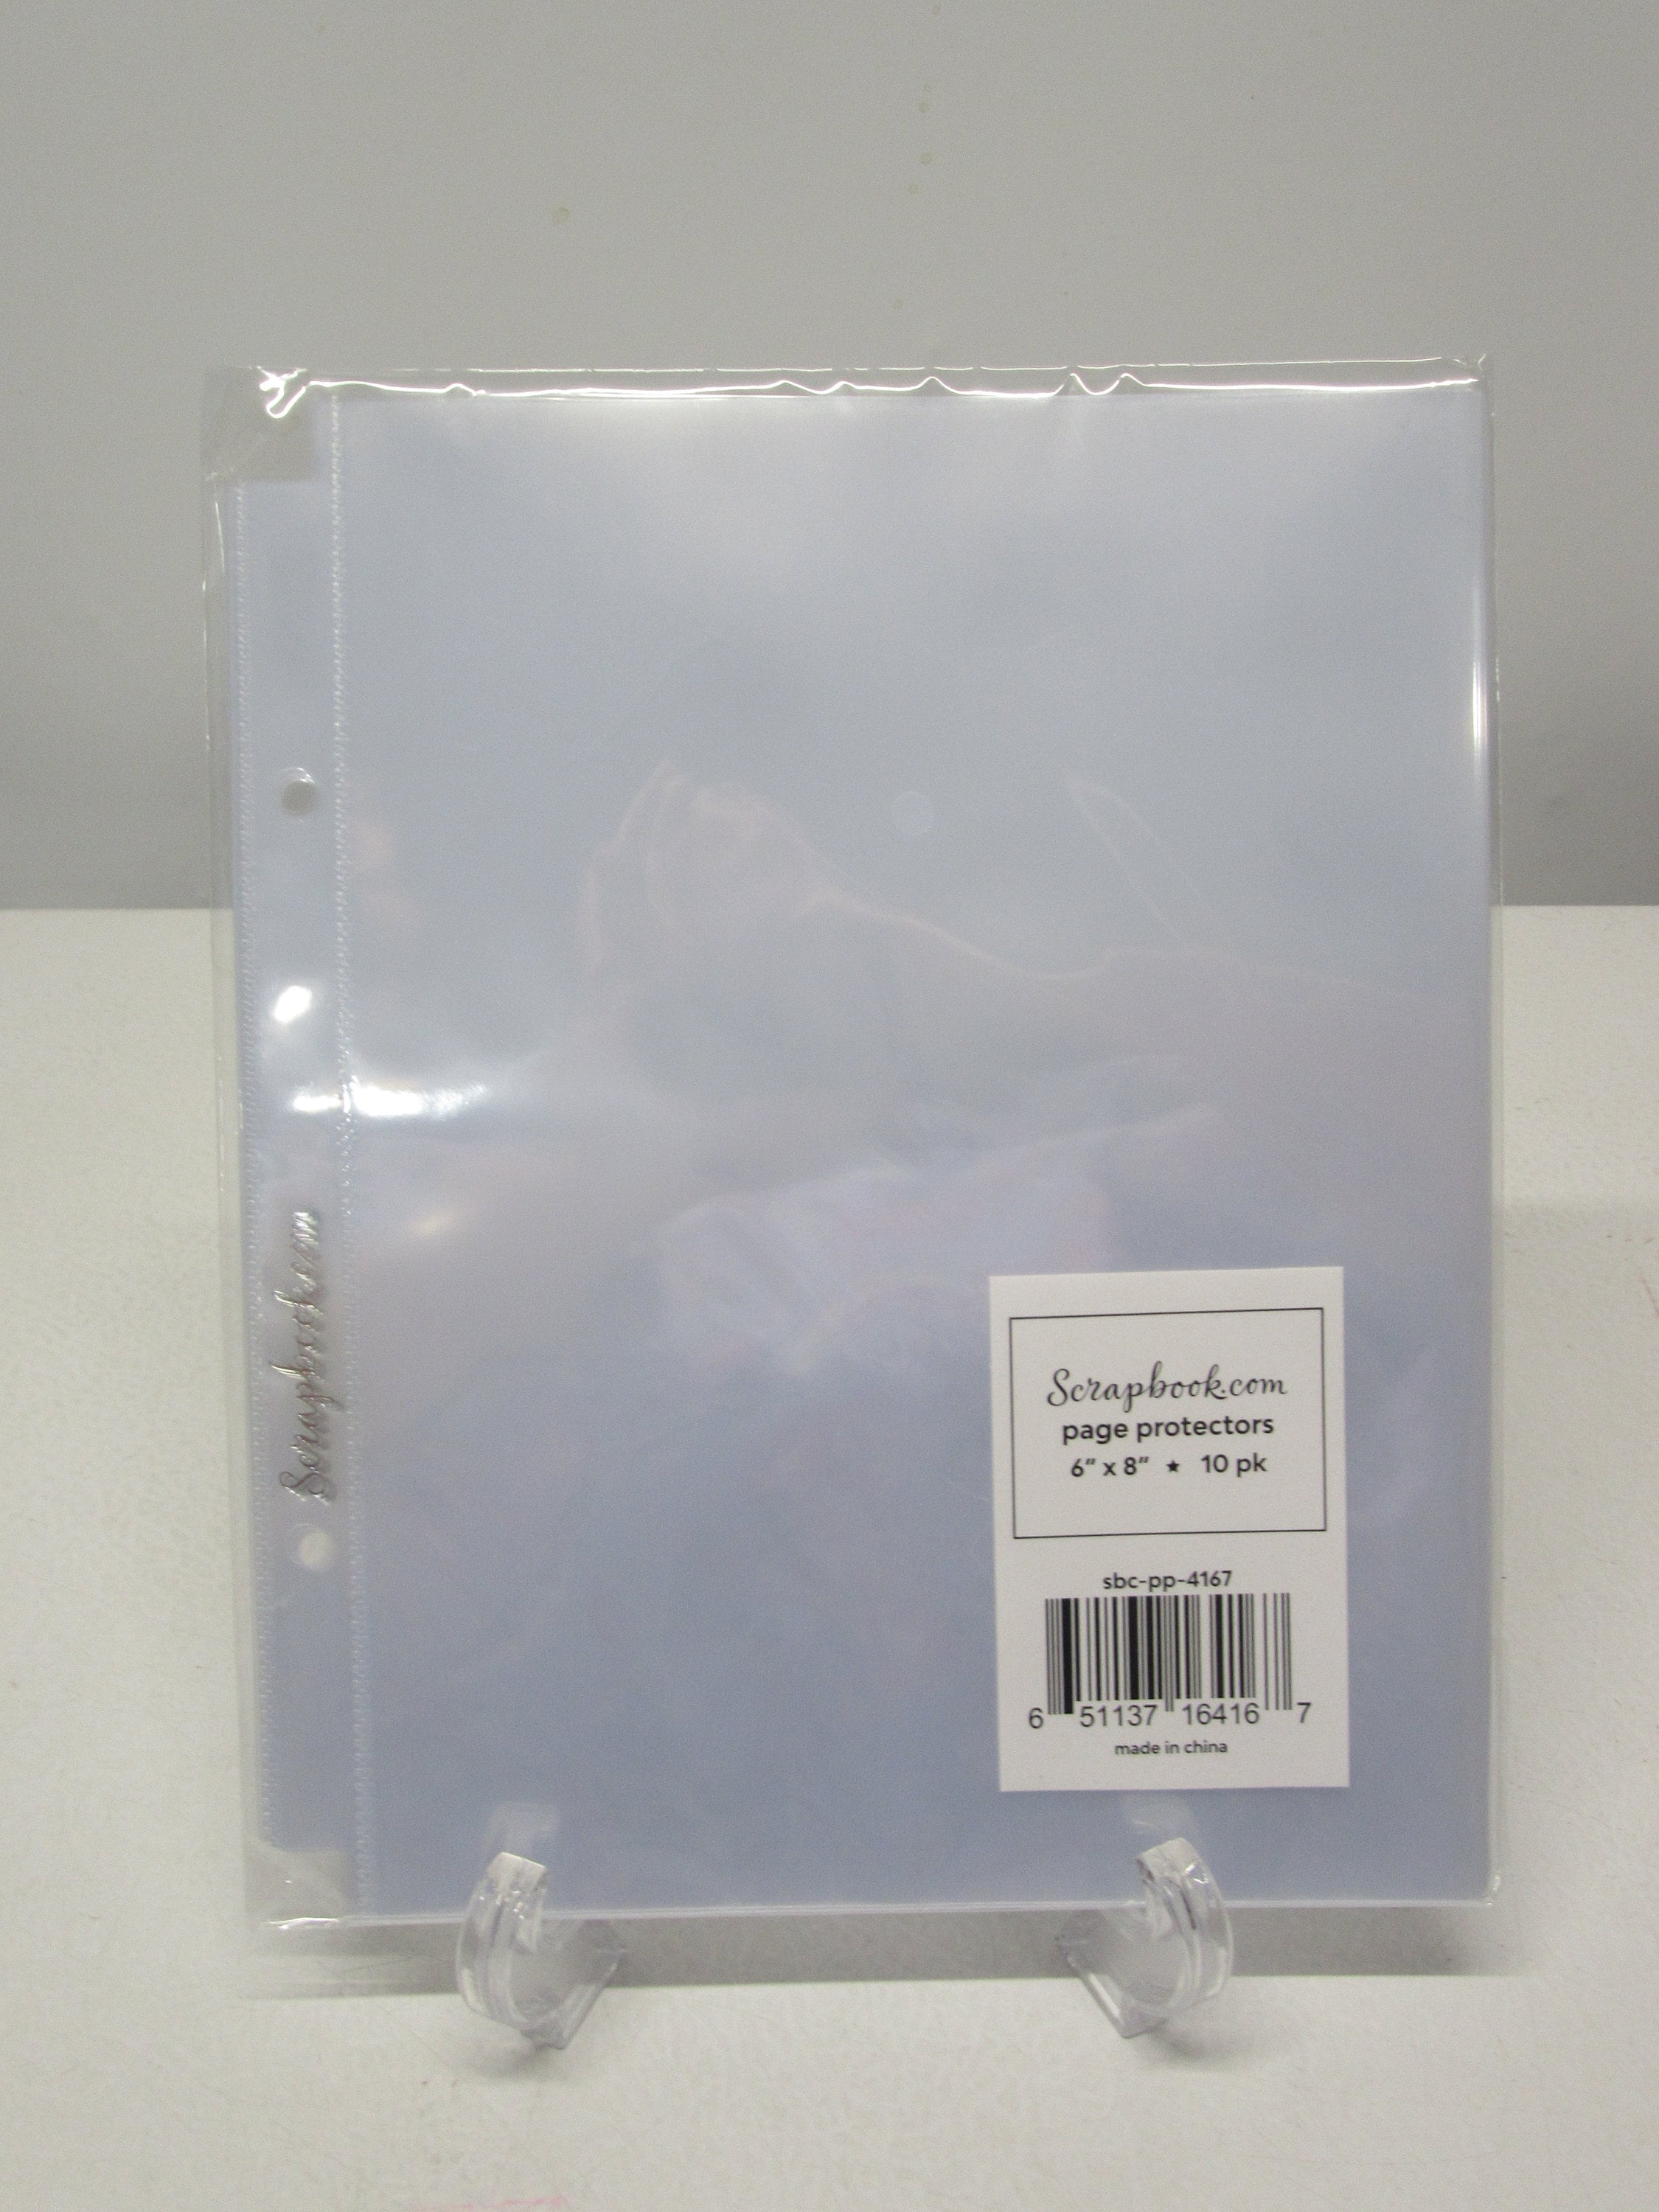 12 Pack A7 Size Clear Sheet Protectors 2.6 x 4.8 Inch Plastic Sleeves Page  Protectors Top Loading Paper Protector for 6 Ring Binders, Acid-Free